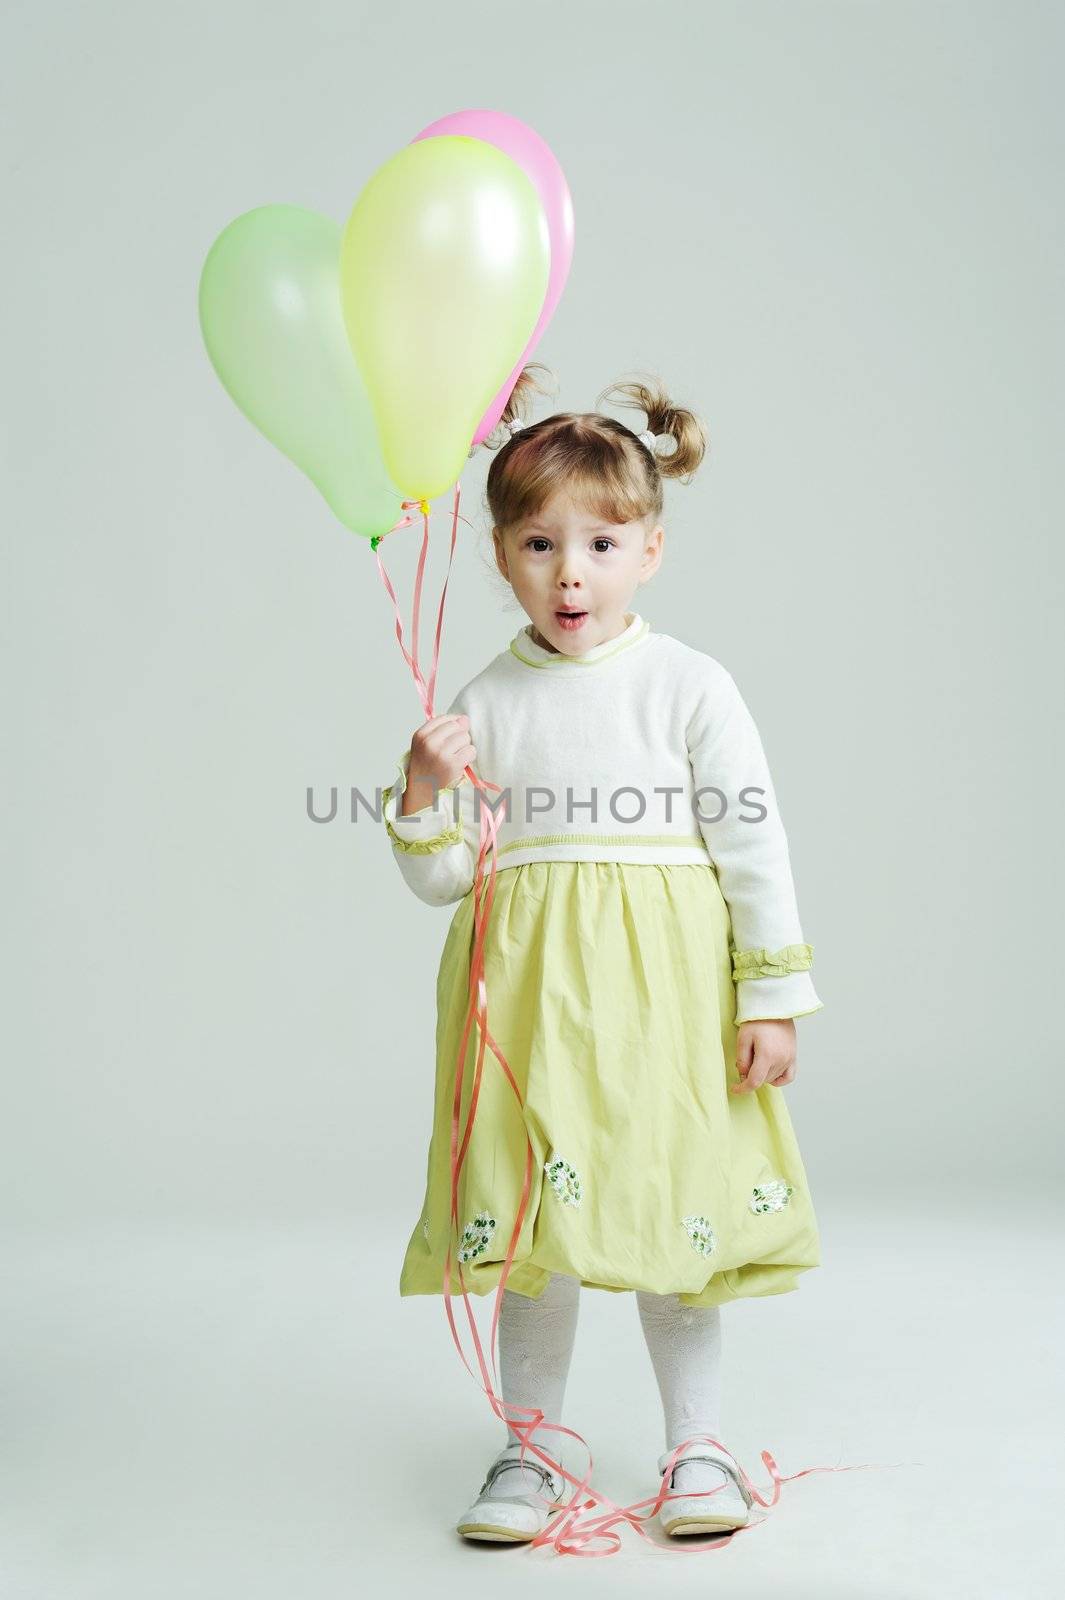 A portrait of a little girl with three balloons